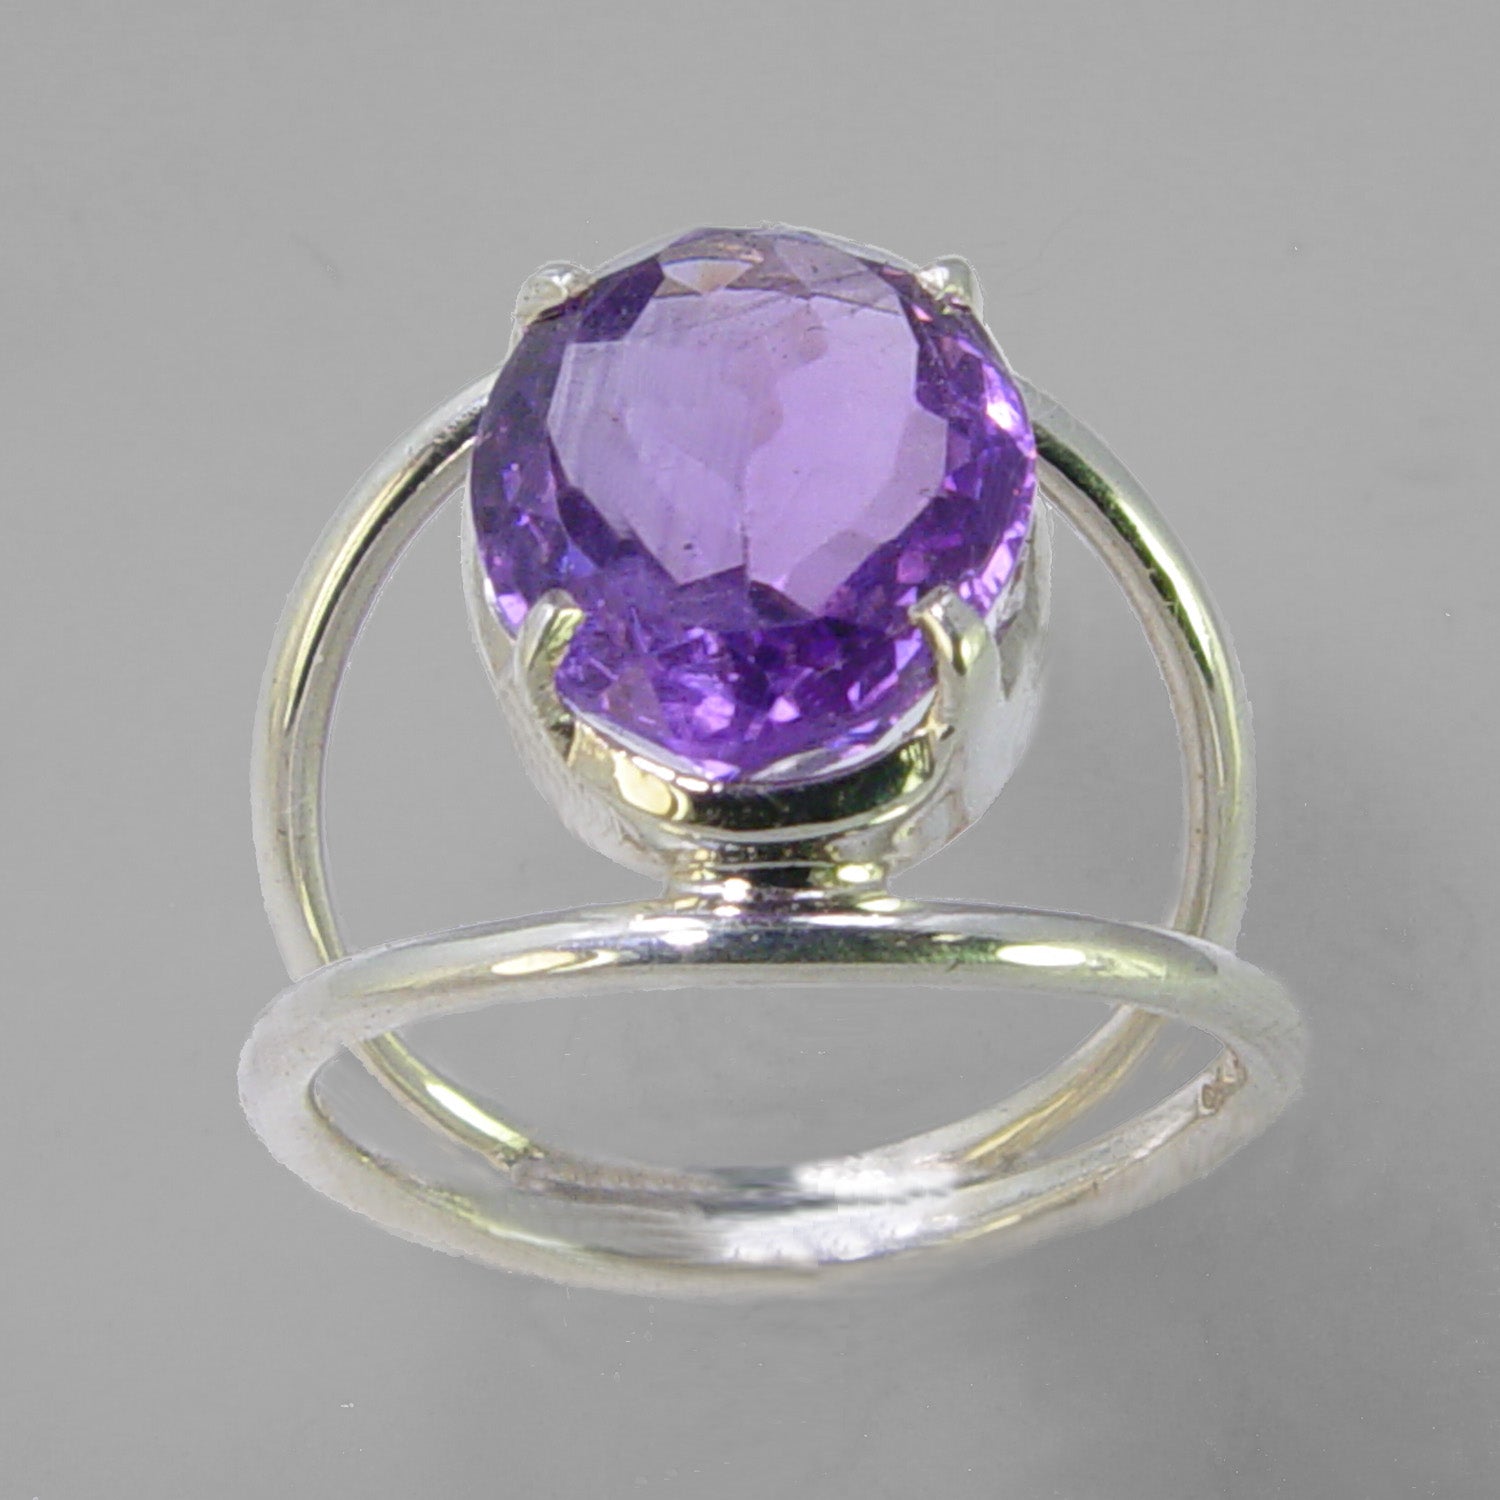 Amethyst 4.7 ct Oval Sterling Silver Ring, Size 7.5